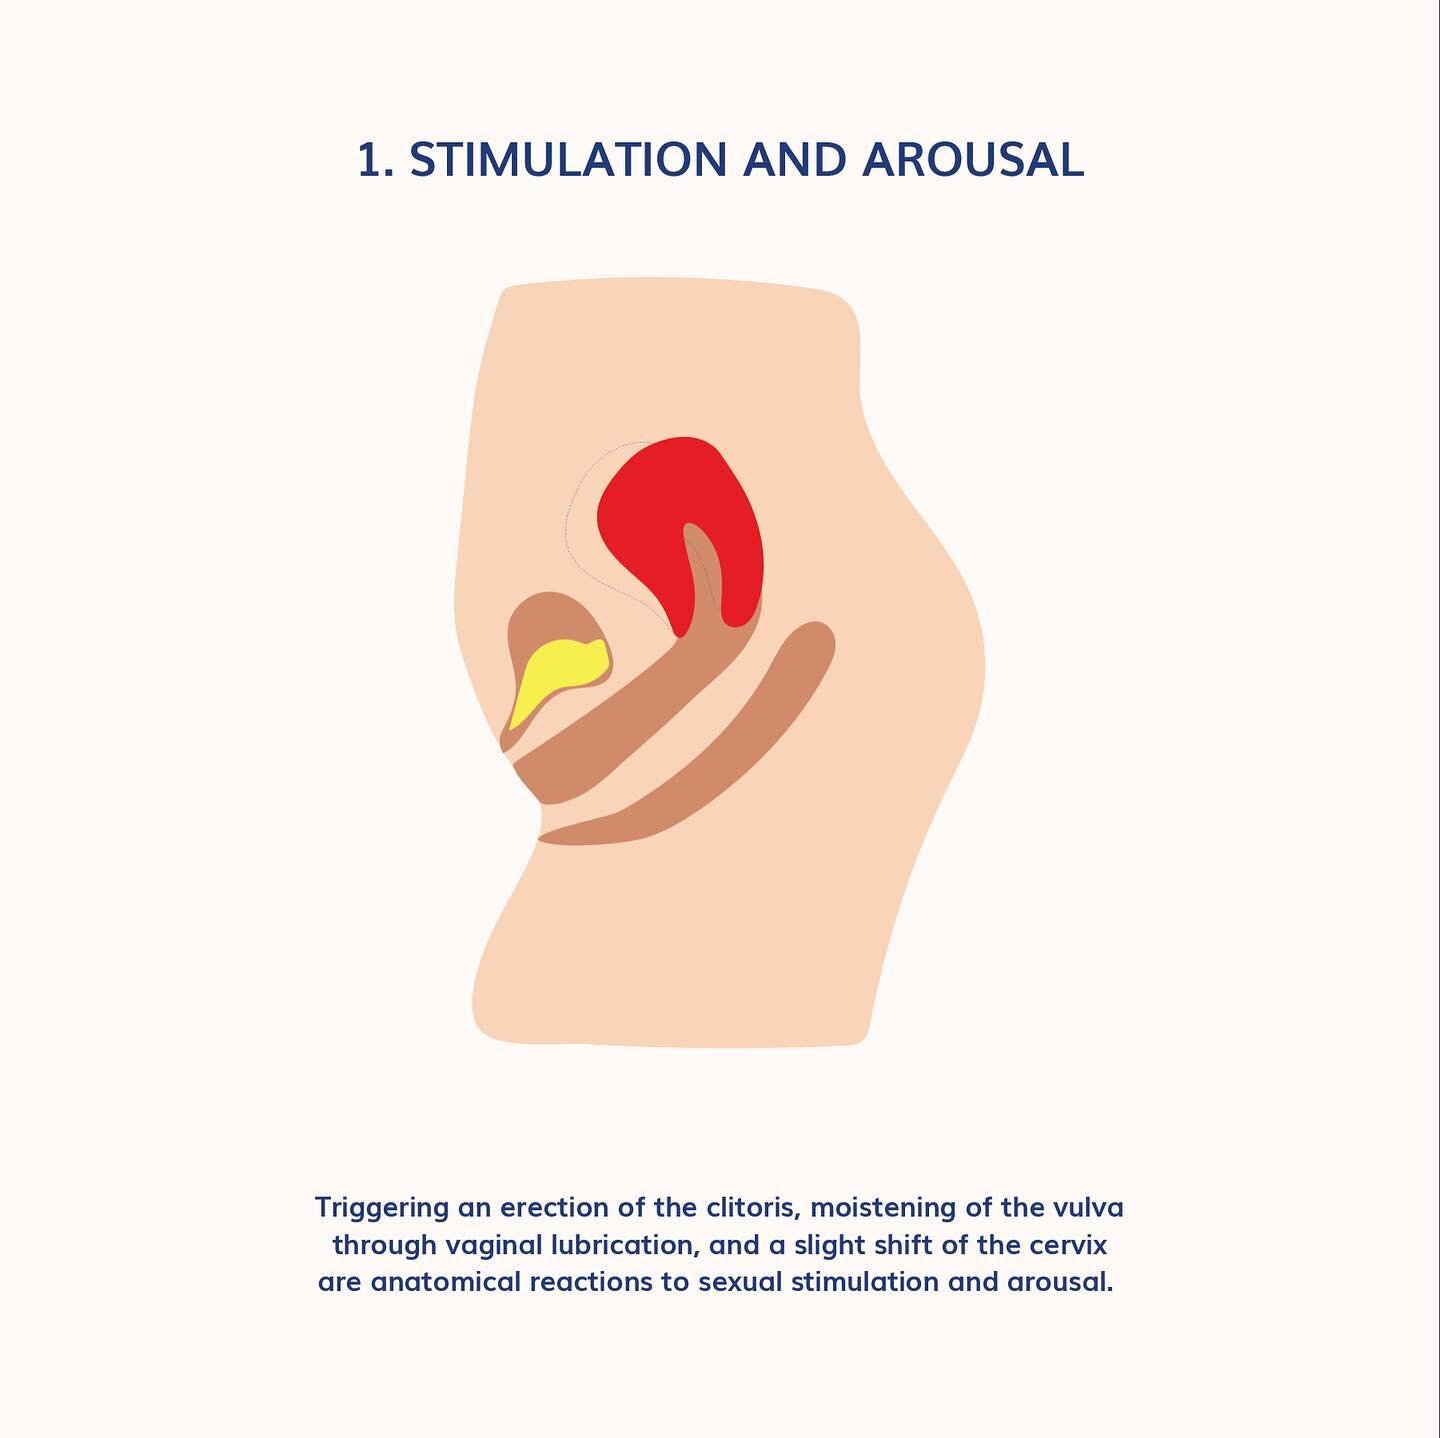 check out the different stages of female arousal during sex and how the cervix moves accordingly. 

the female body is pure magic 🪄 💫